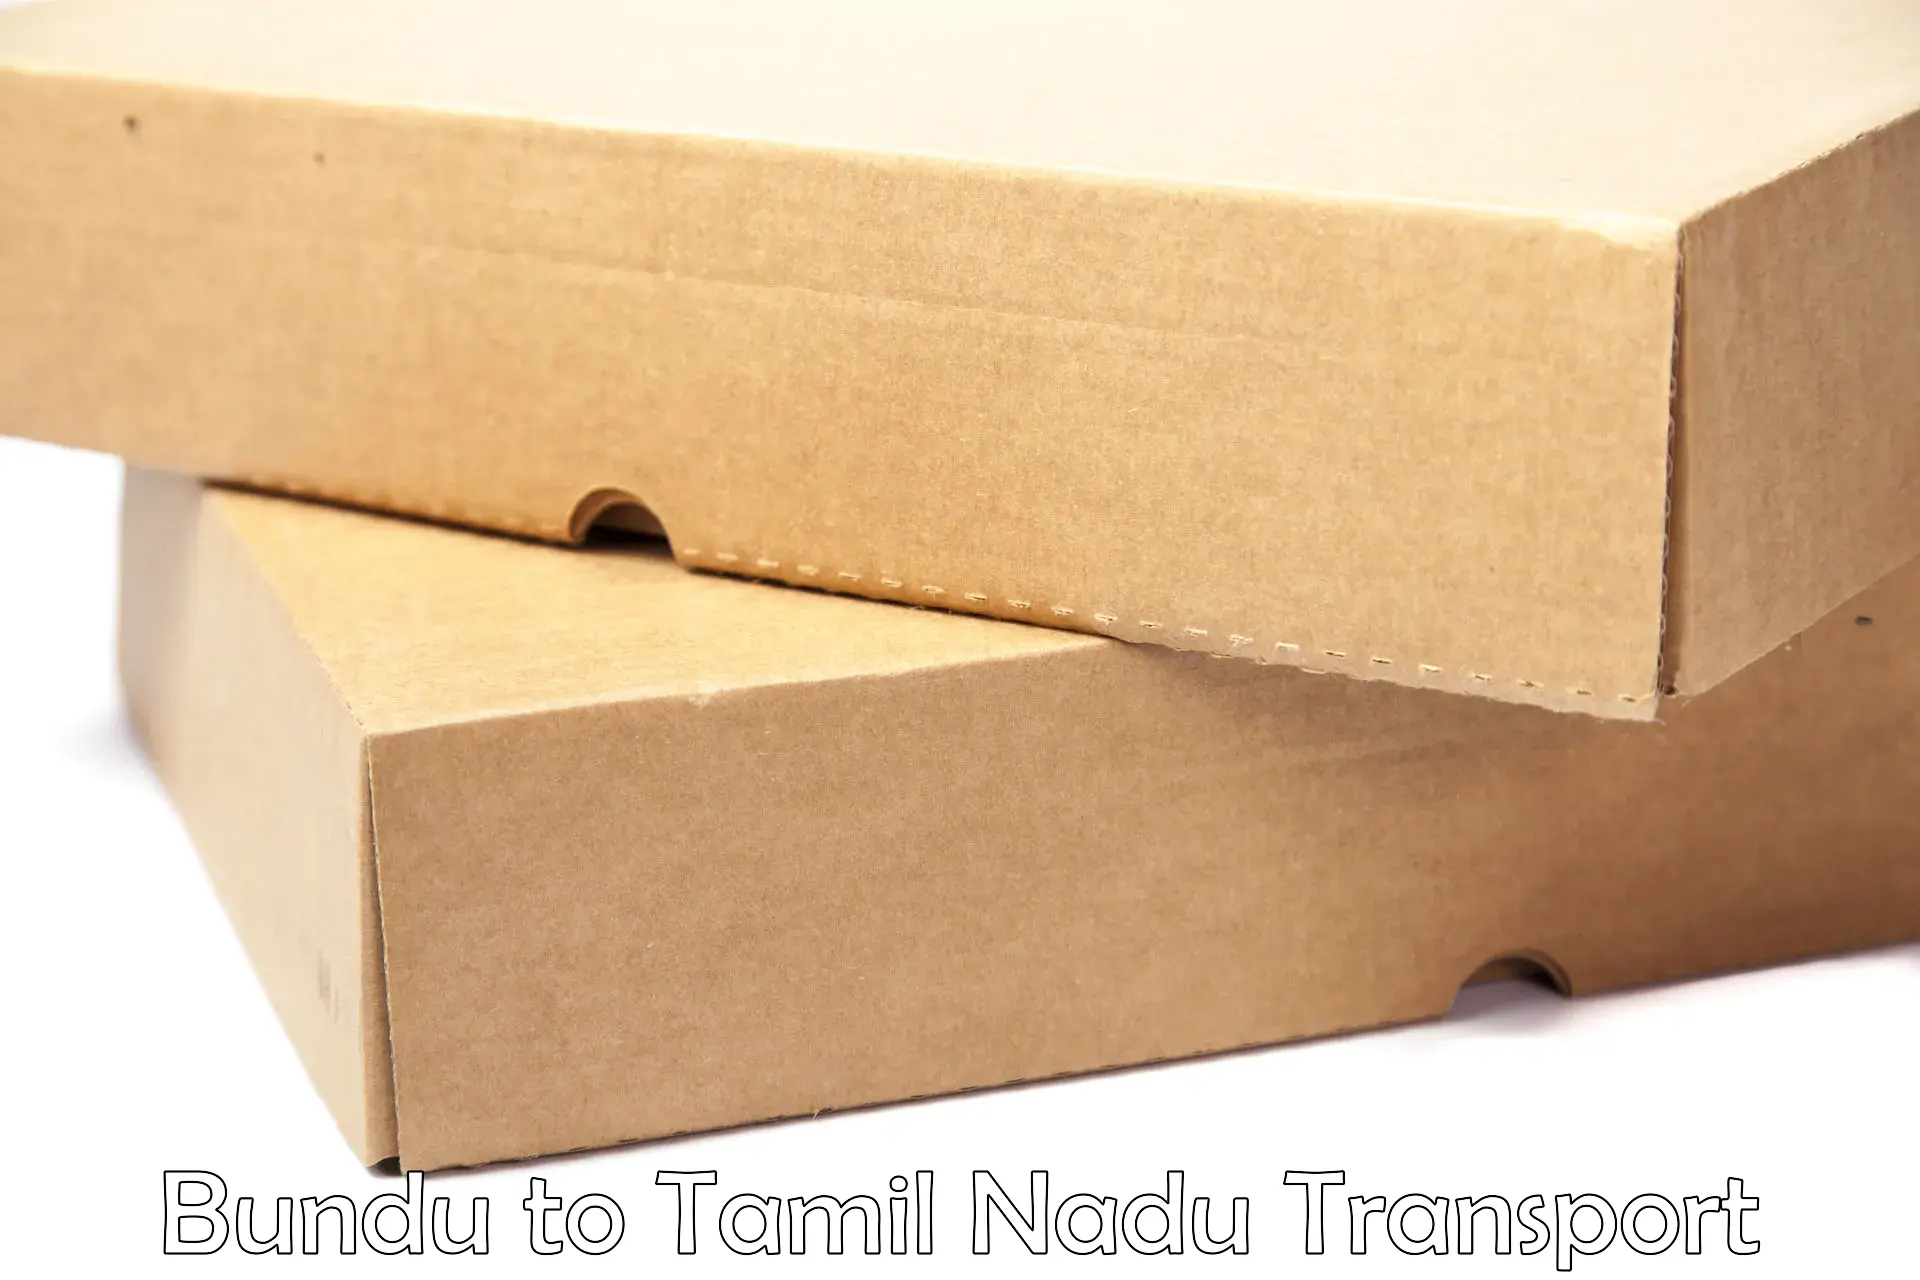 Road transport services Bundu to Saveetha Institute of Medical and Technical Sciences Chennai